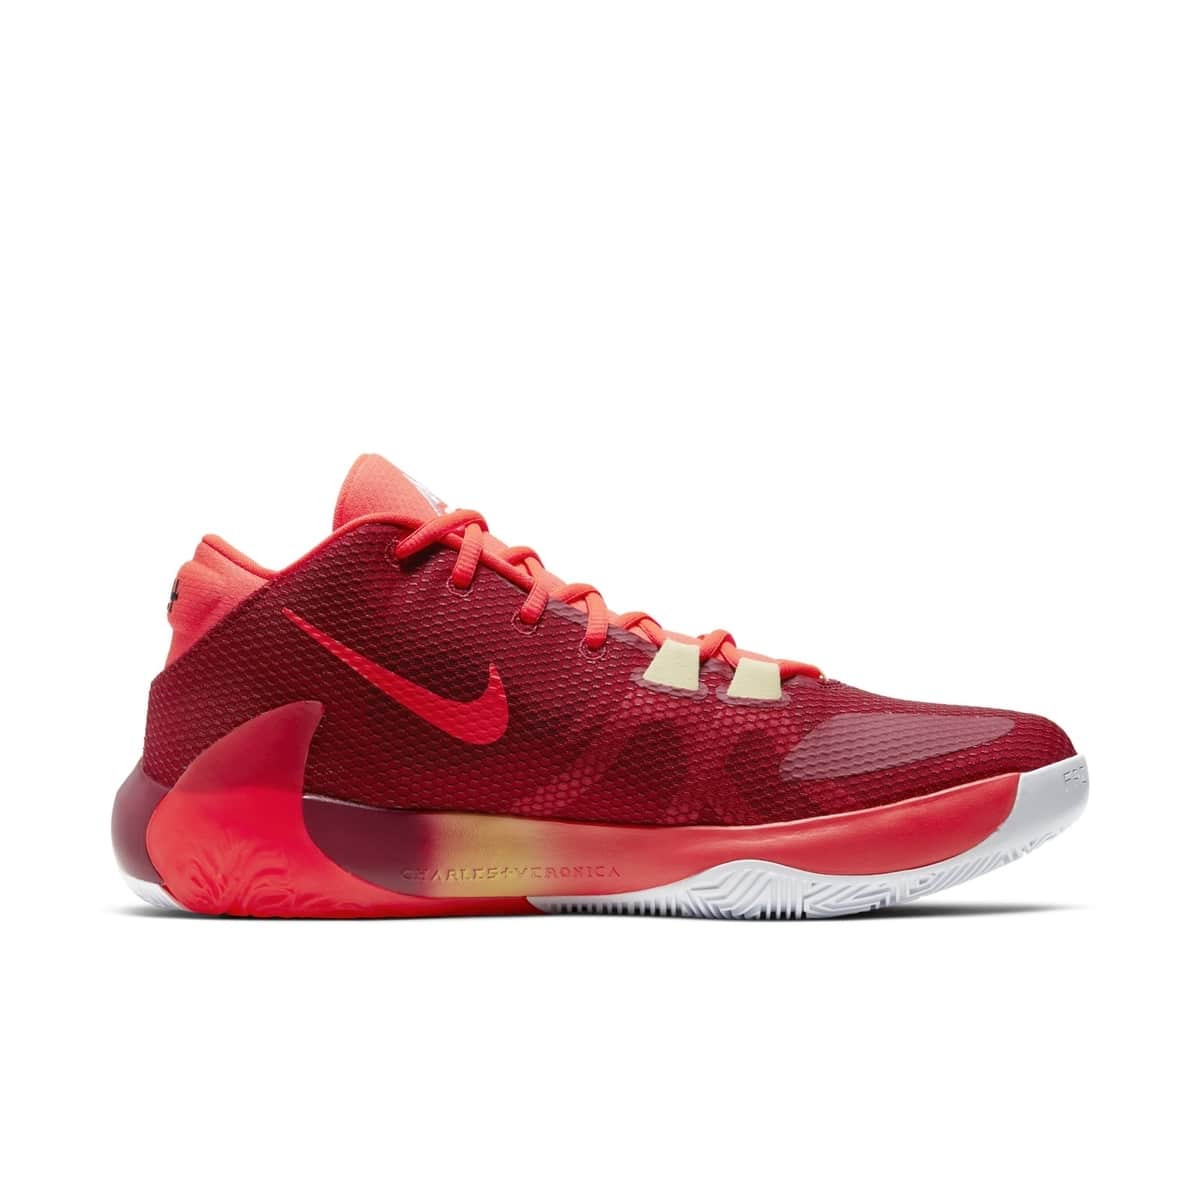 The Nike Zoom Freak 1 to Release in an All Bros Colorway - WearTesters